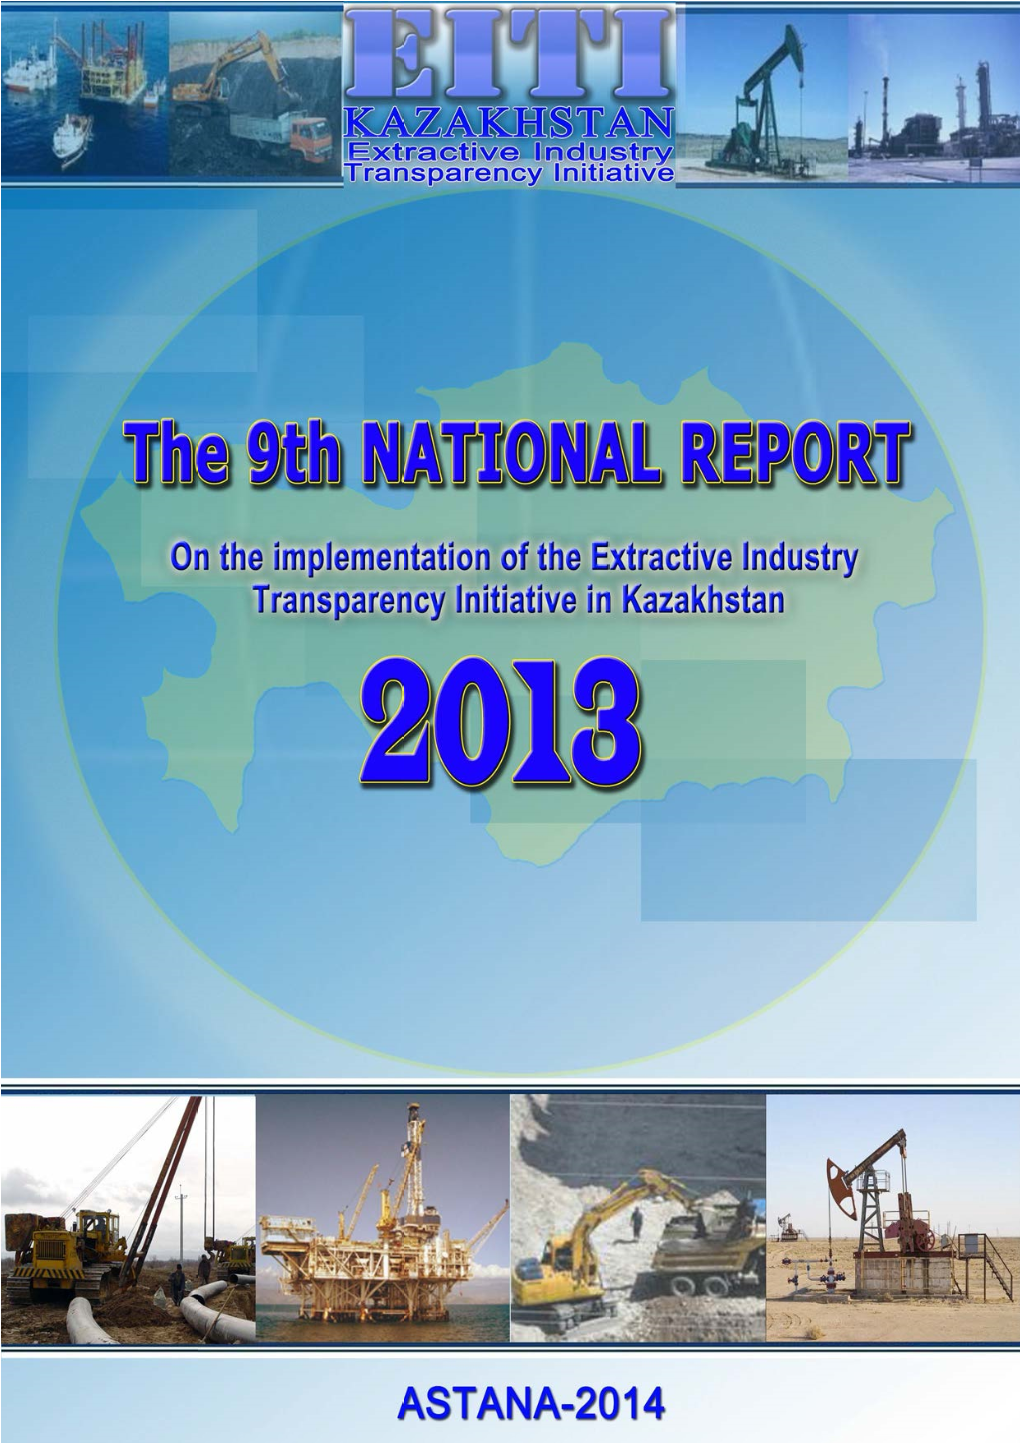 The 9Th NATIONAL REPORT on Implementation of the Extractive